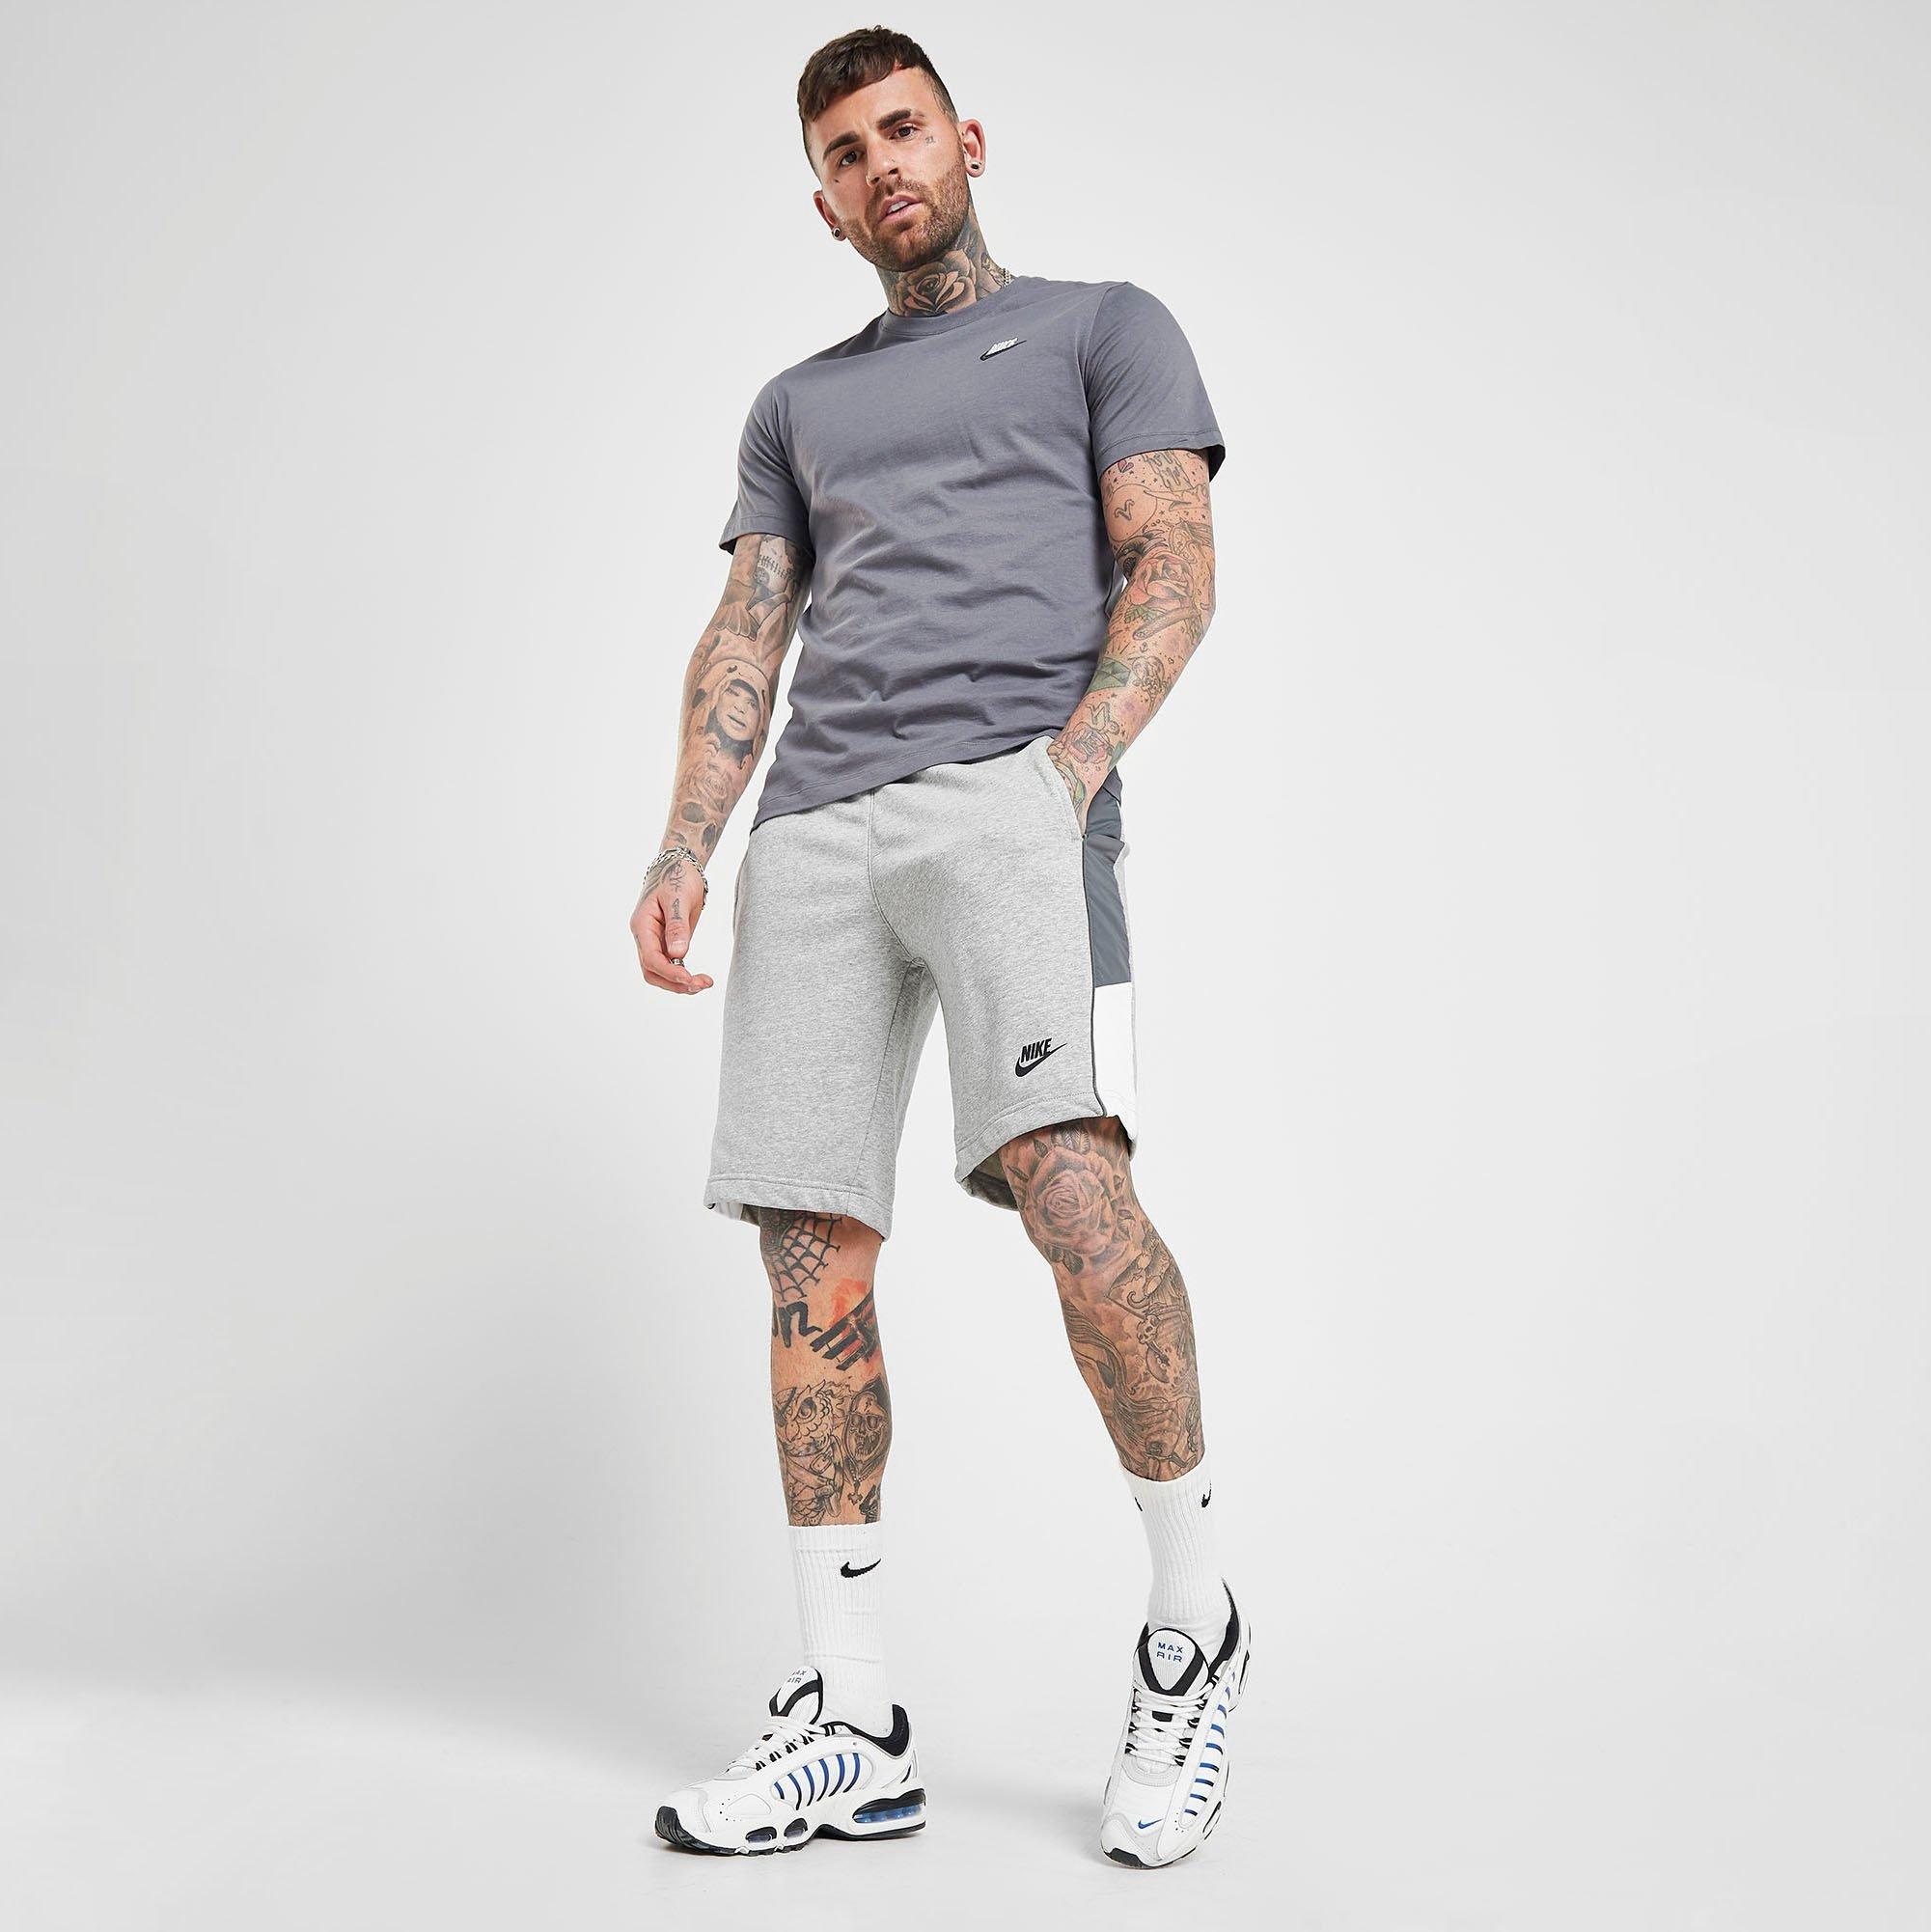 nike shorts outfit